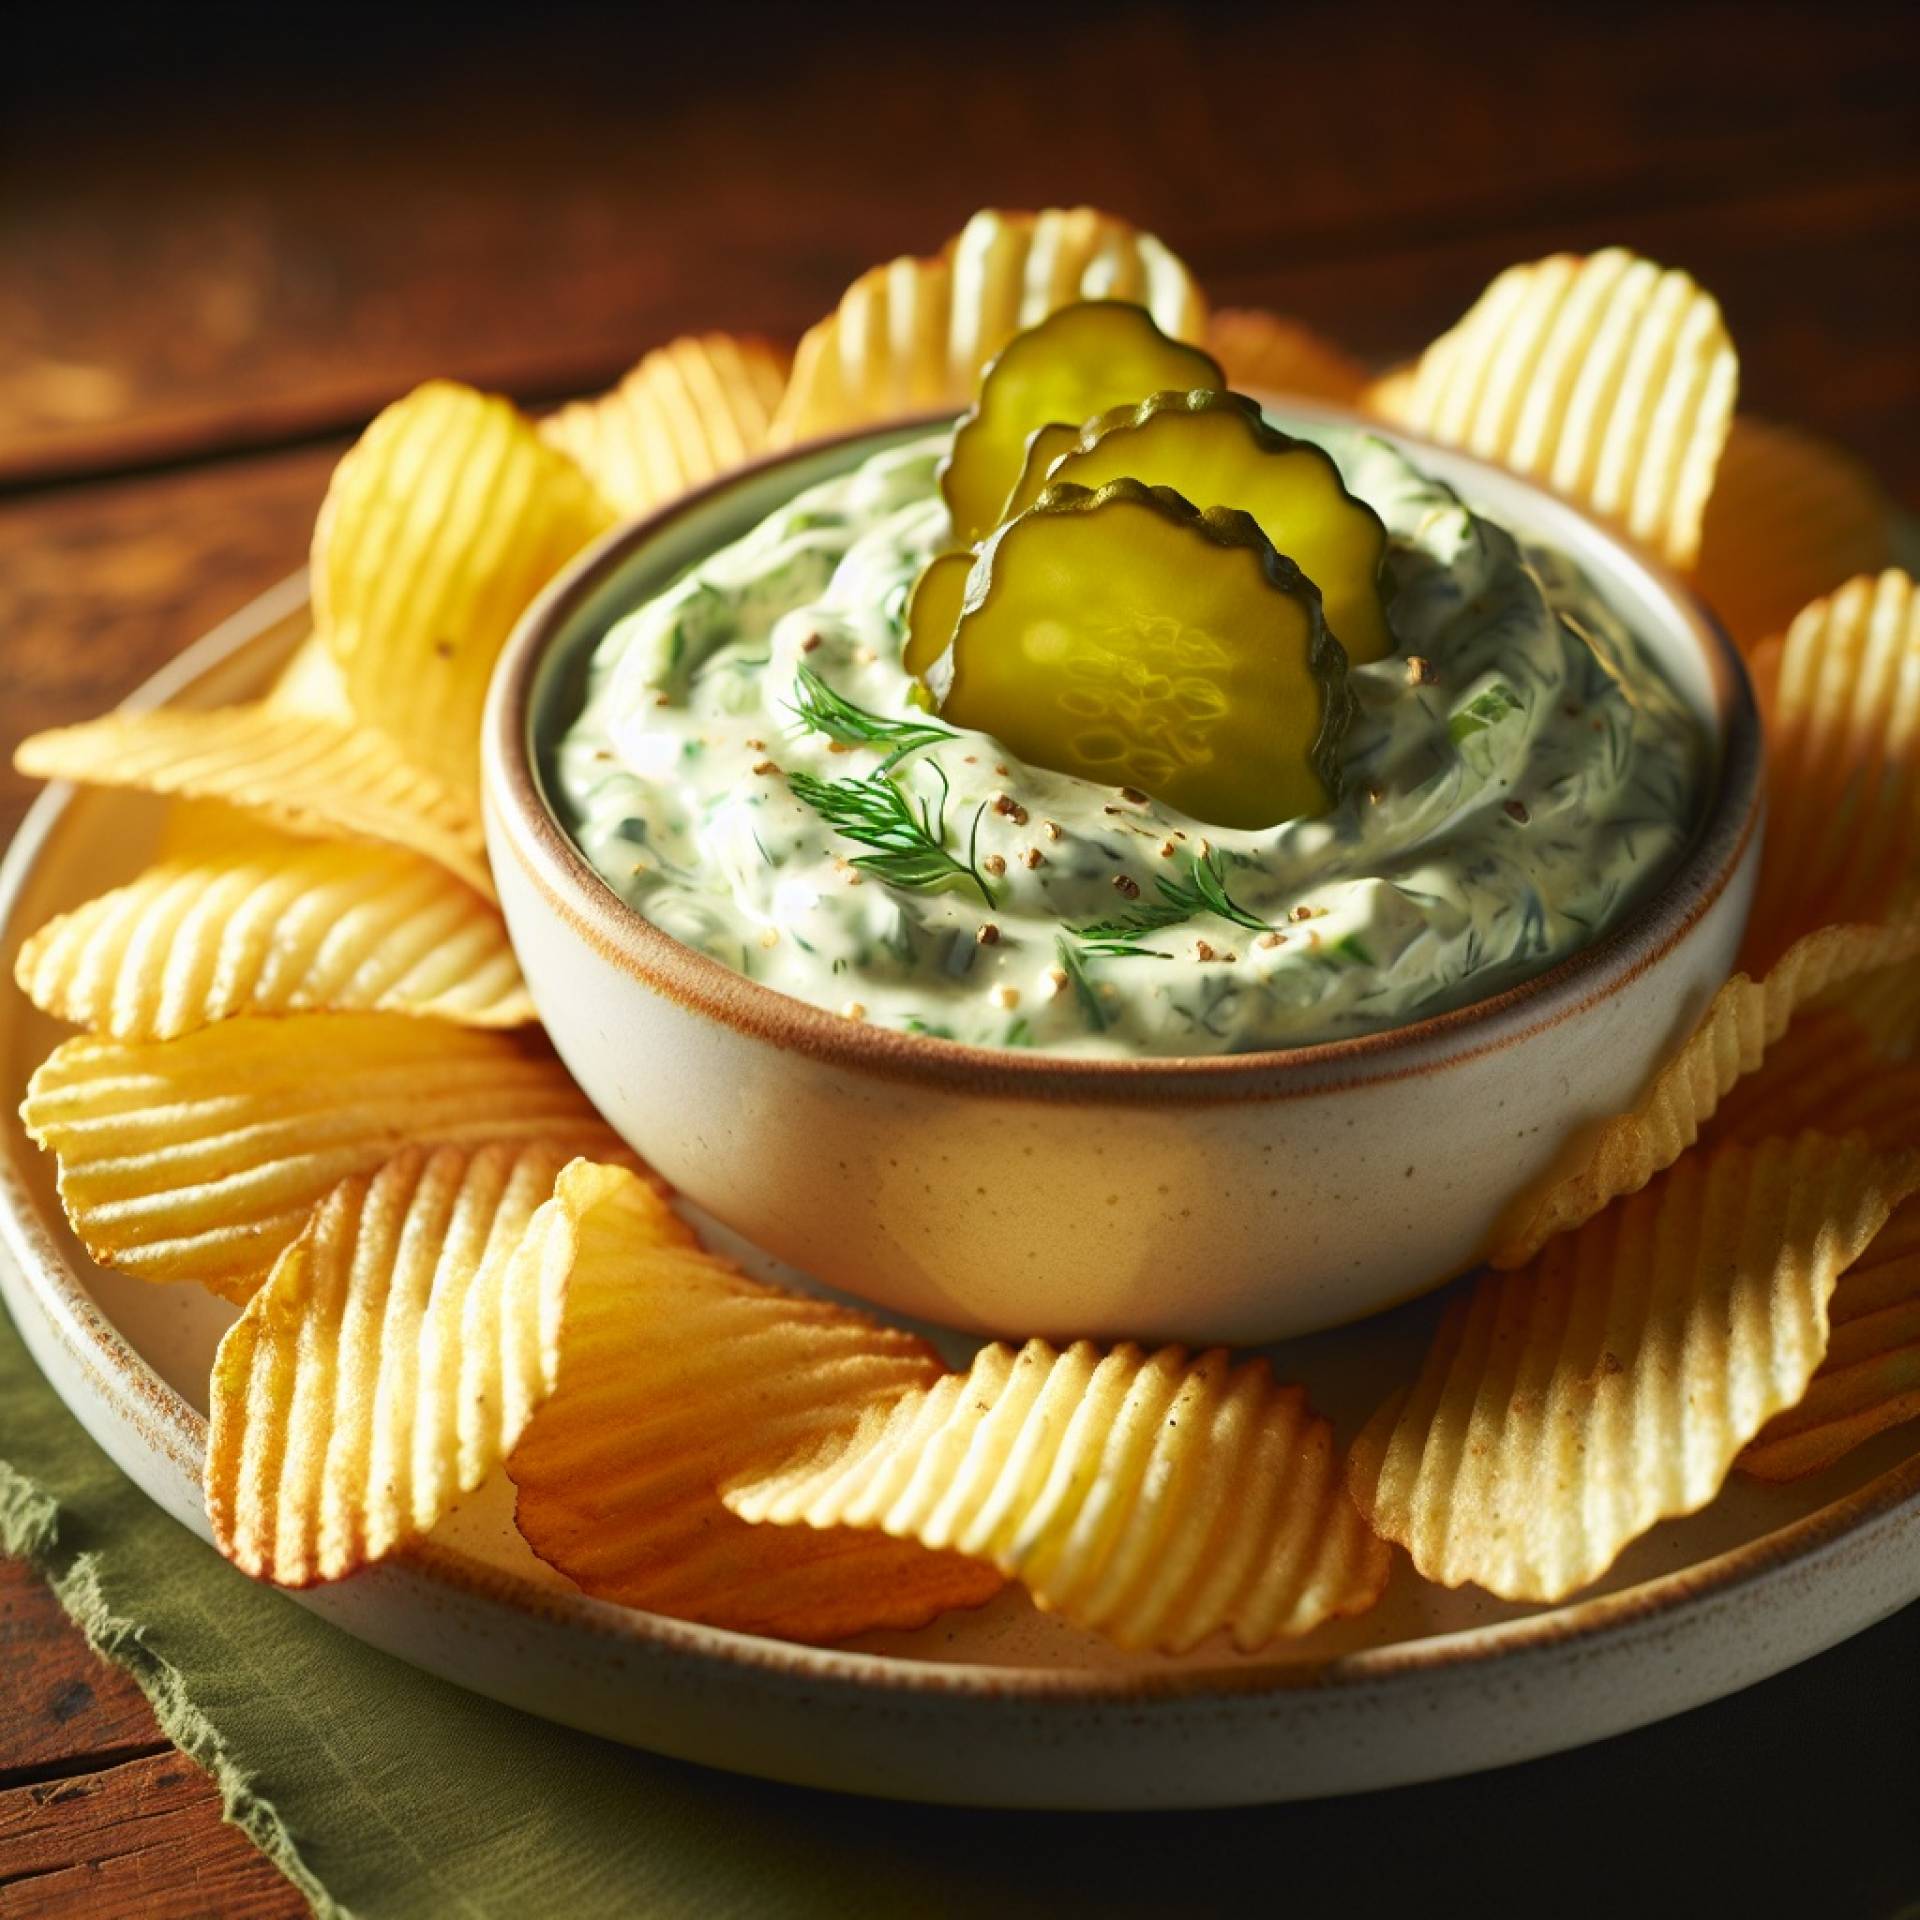 Creamy Pickle Dip with Housemade Potato Crinkle Cut Crisps